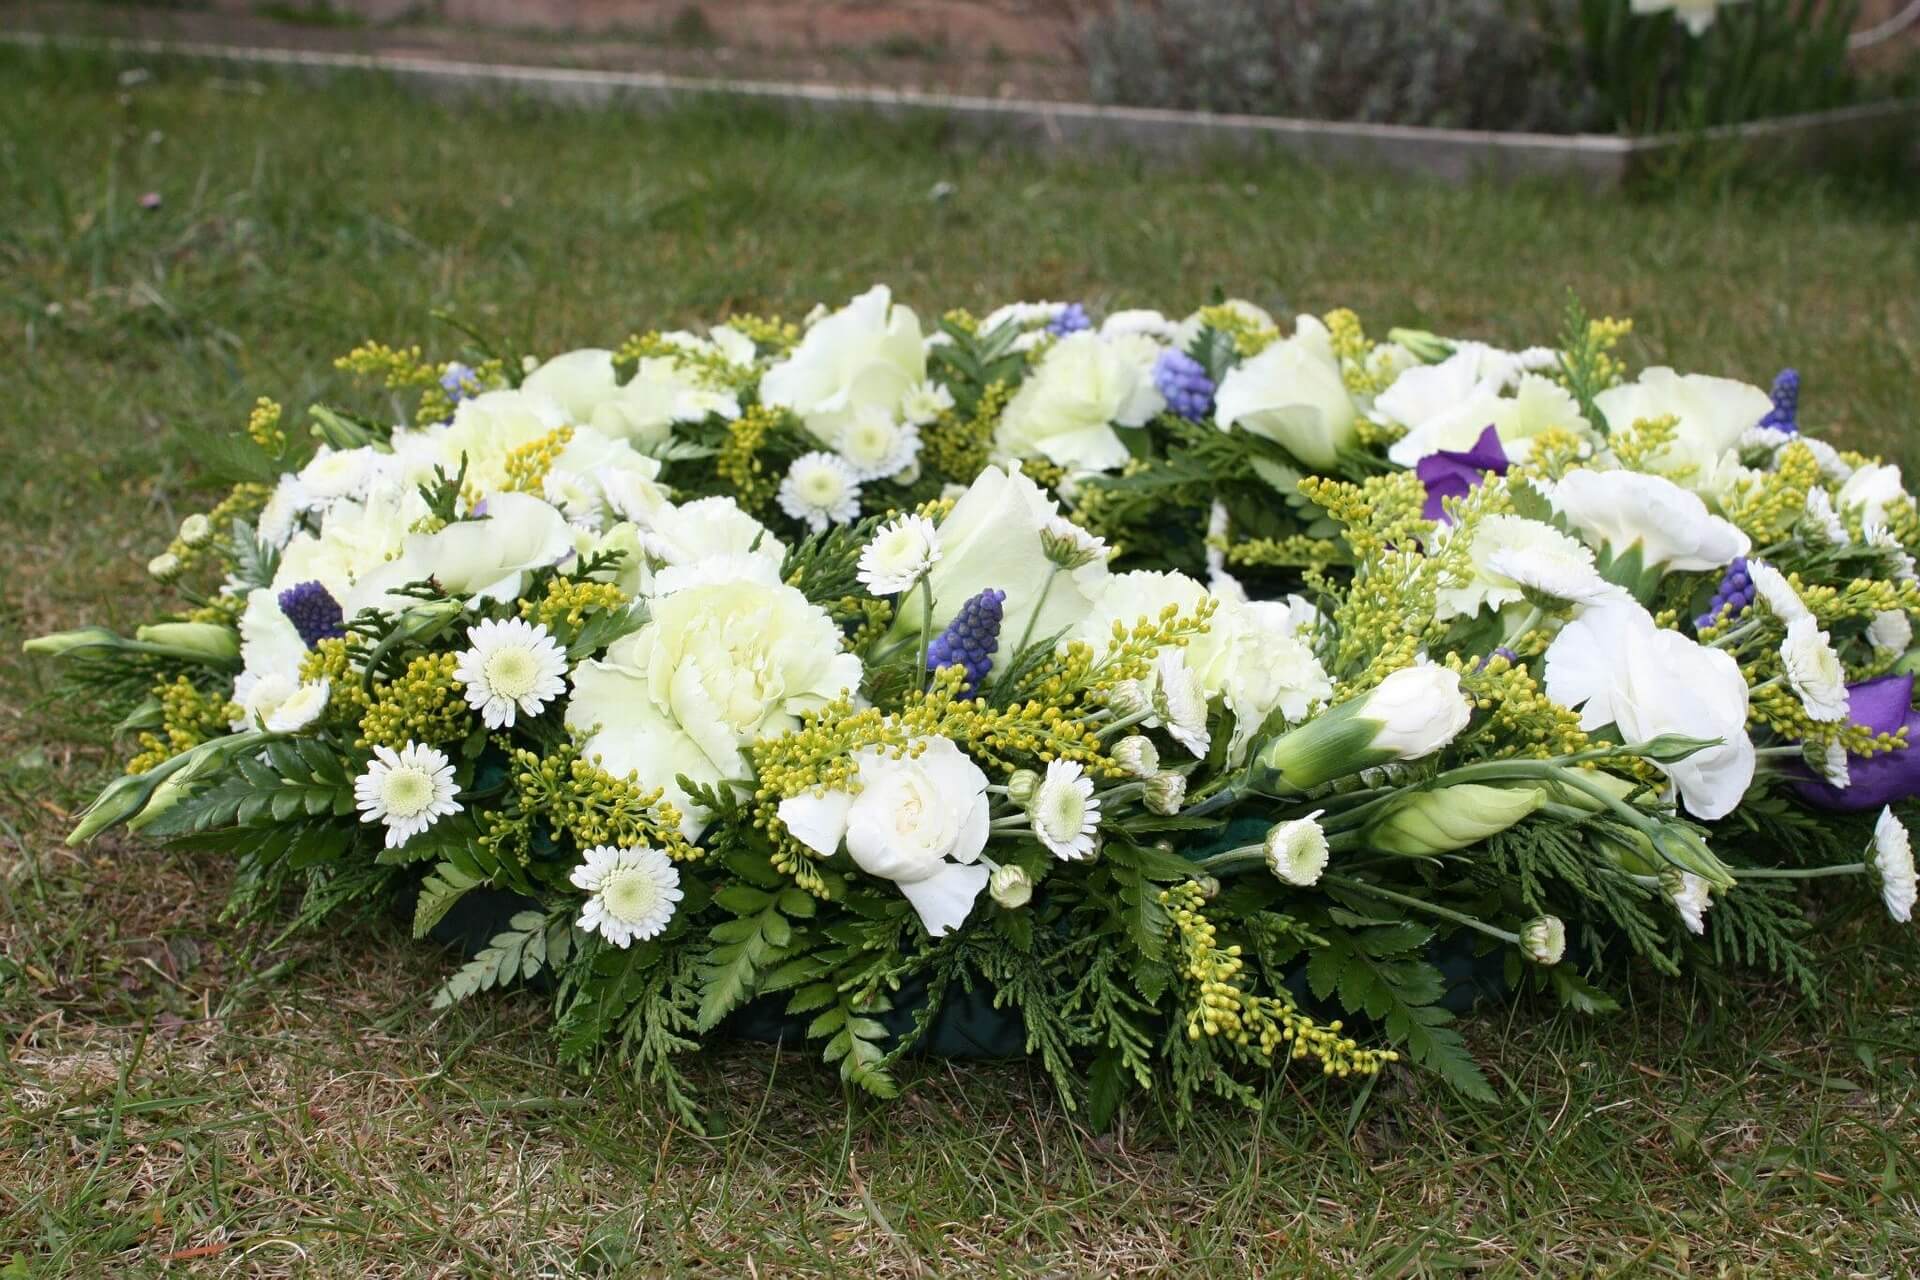 Carter Smart Funeral Home: The Uber of Funeral Homes - directly order flowers